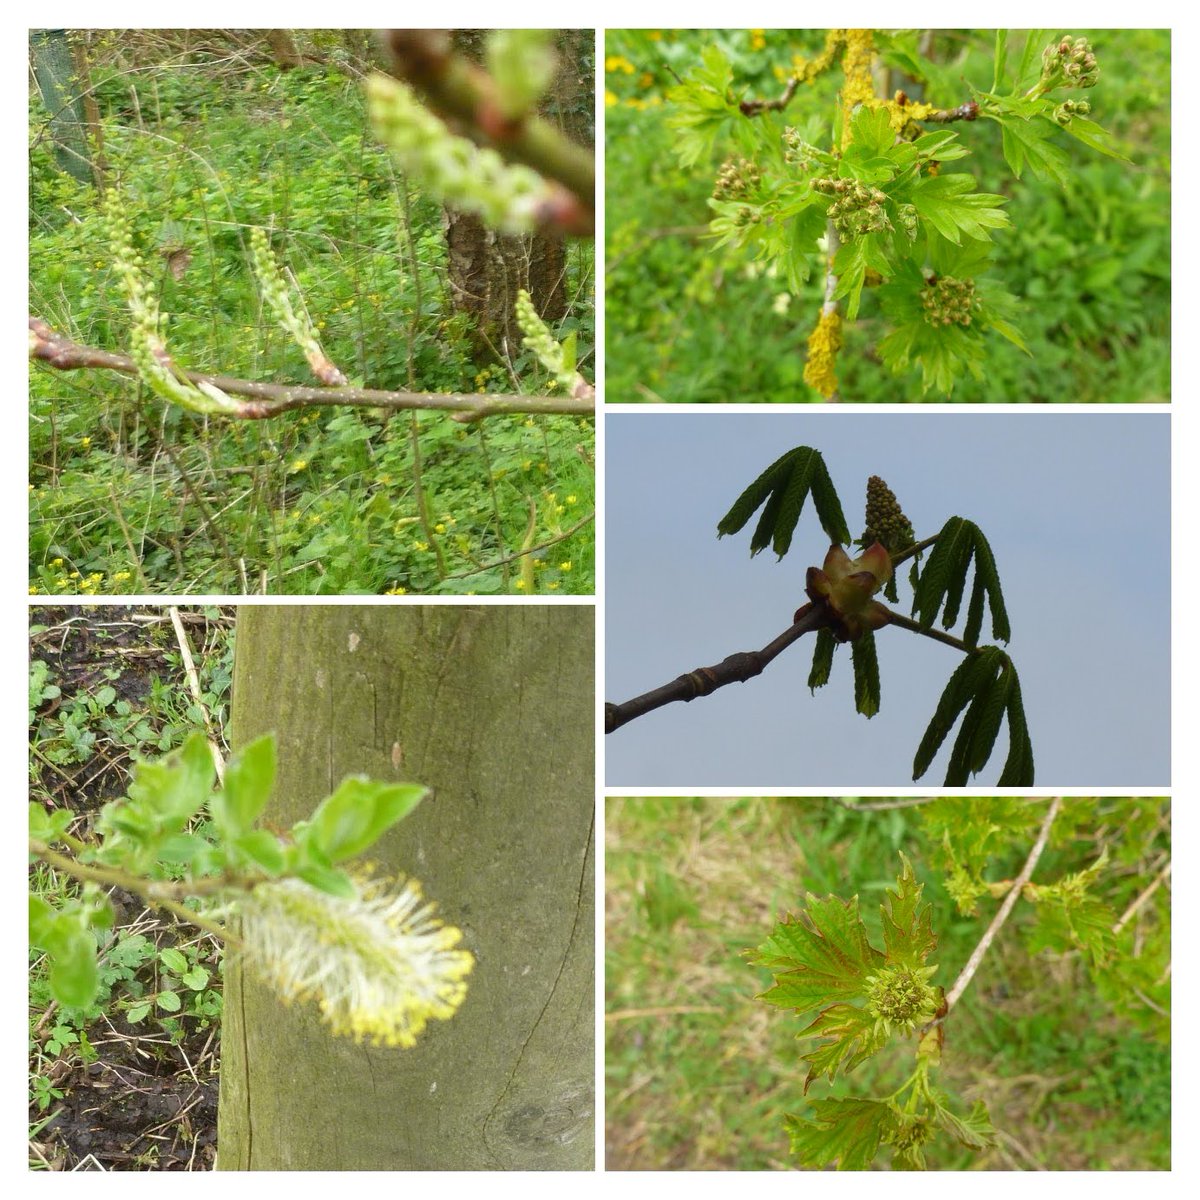 Not many wild #treeflowers for #WildflowerHour on Thursday 11 April - plenty of buds. Cherry plum (?) and blackthorn in flower. buds include hawthorn, horse chestnut, and guelder rose. Still a few catkins about. Unsure about top left in second pic. #WildflowerID